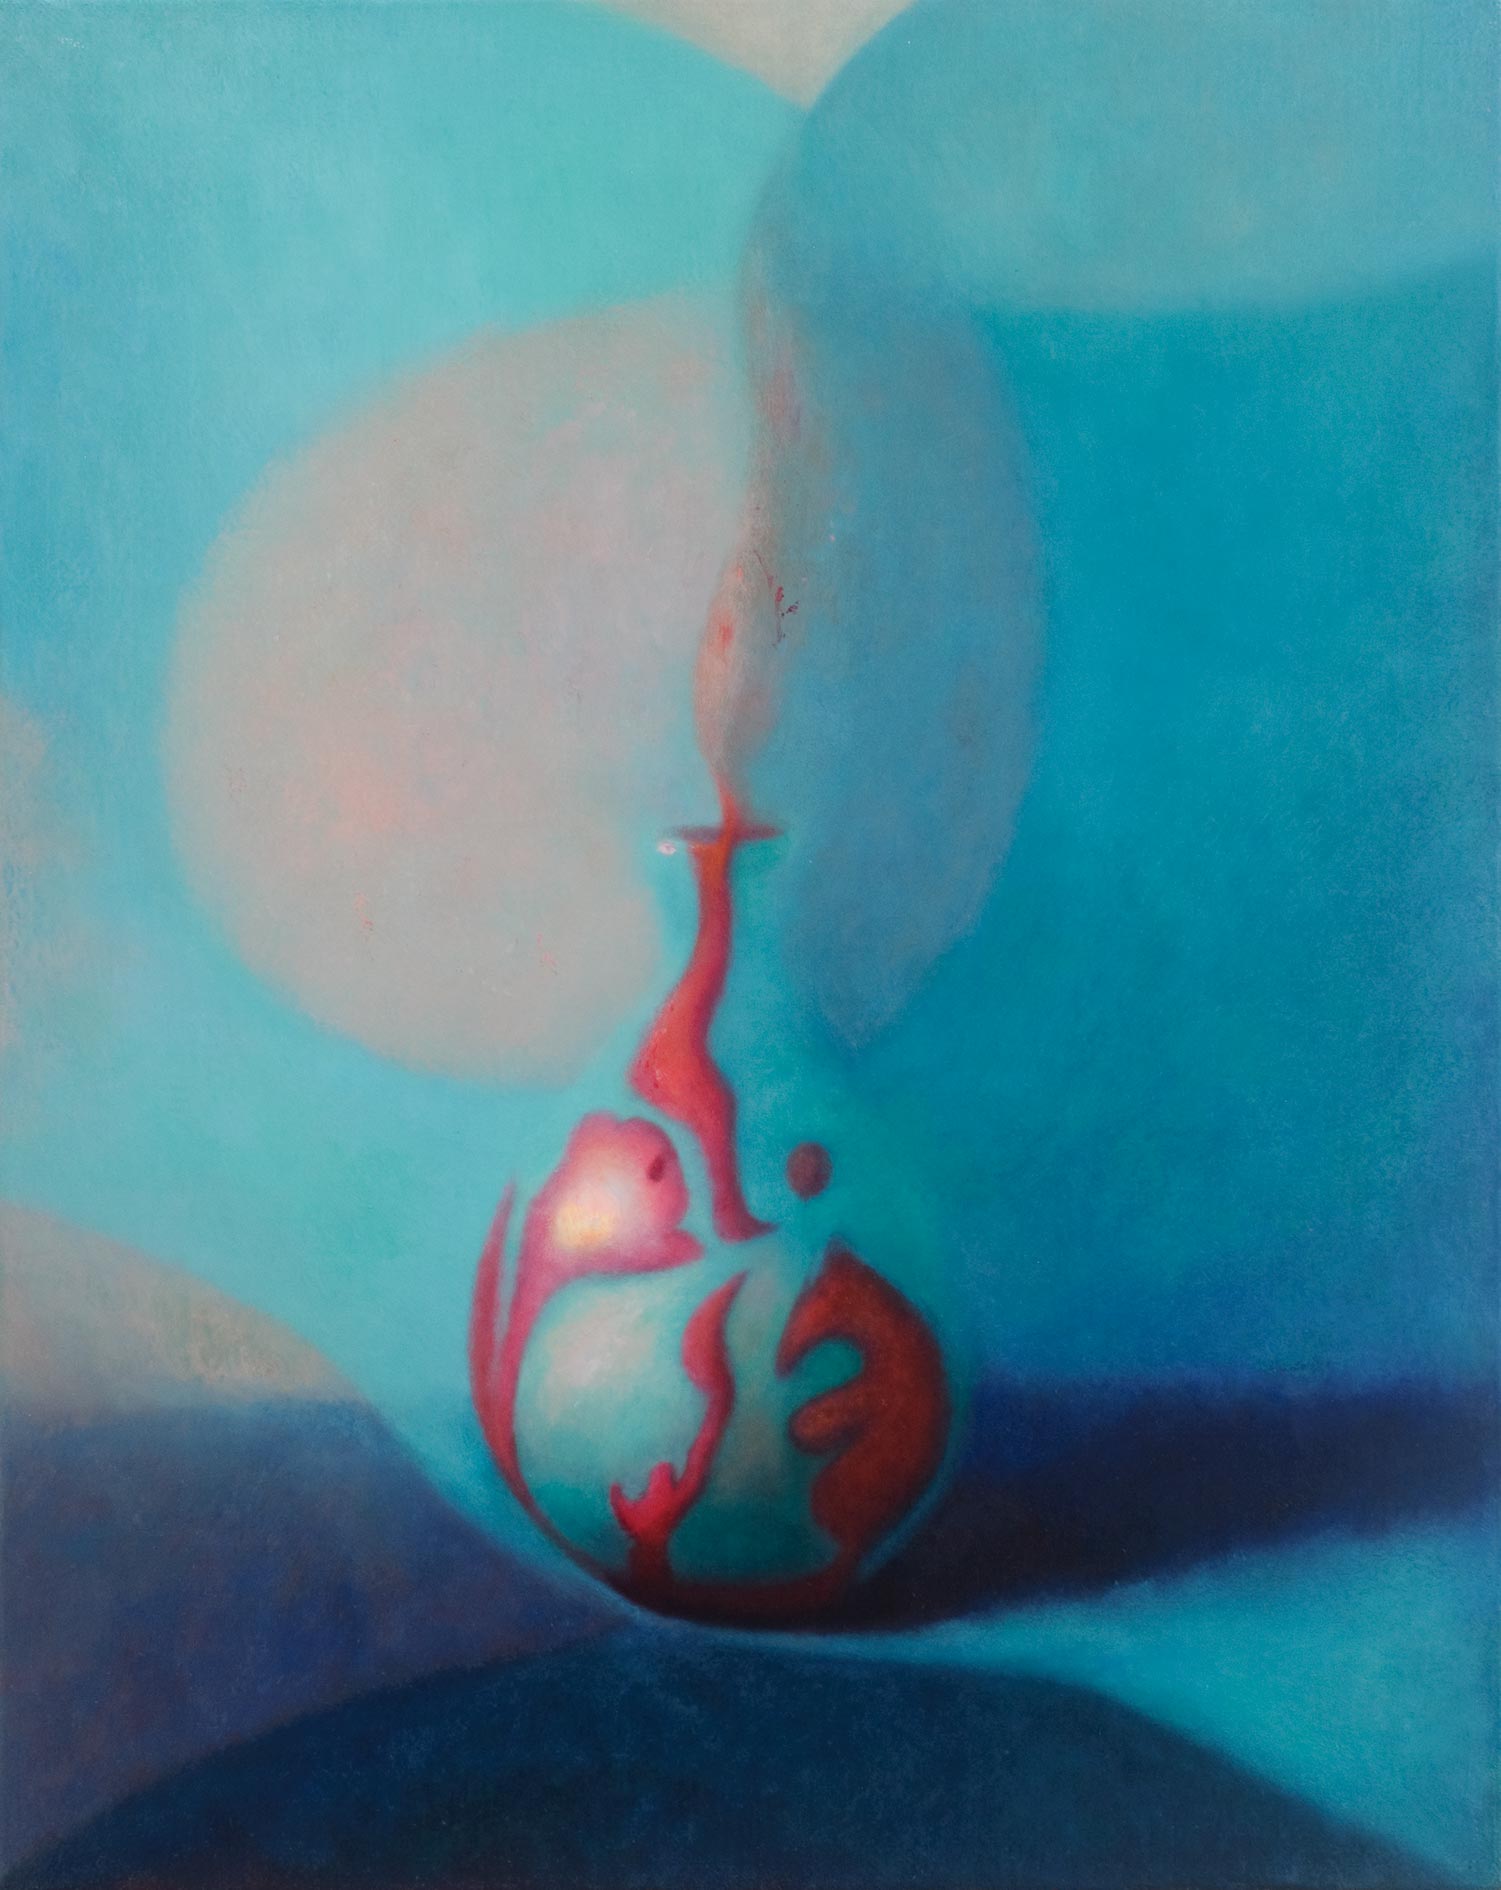 Inside Out, an original oil painting by Ute Milotich